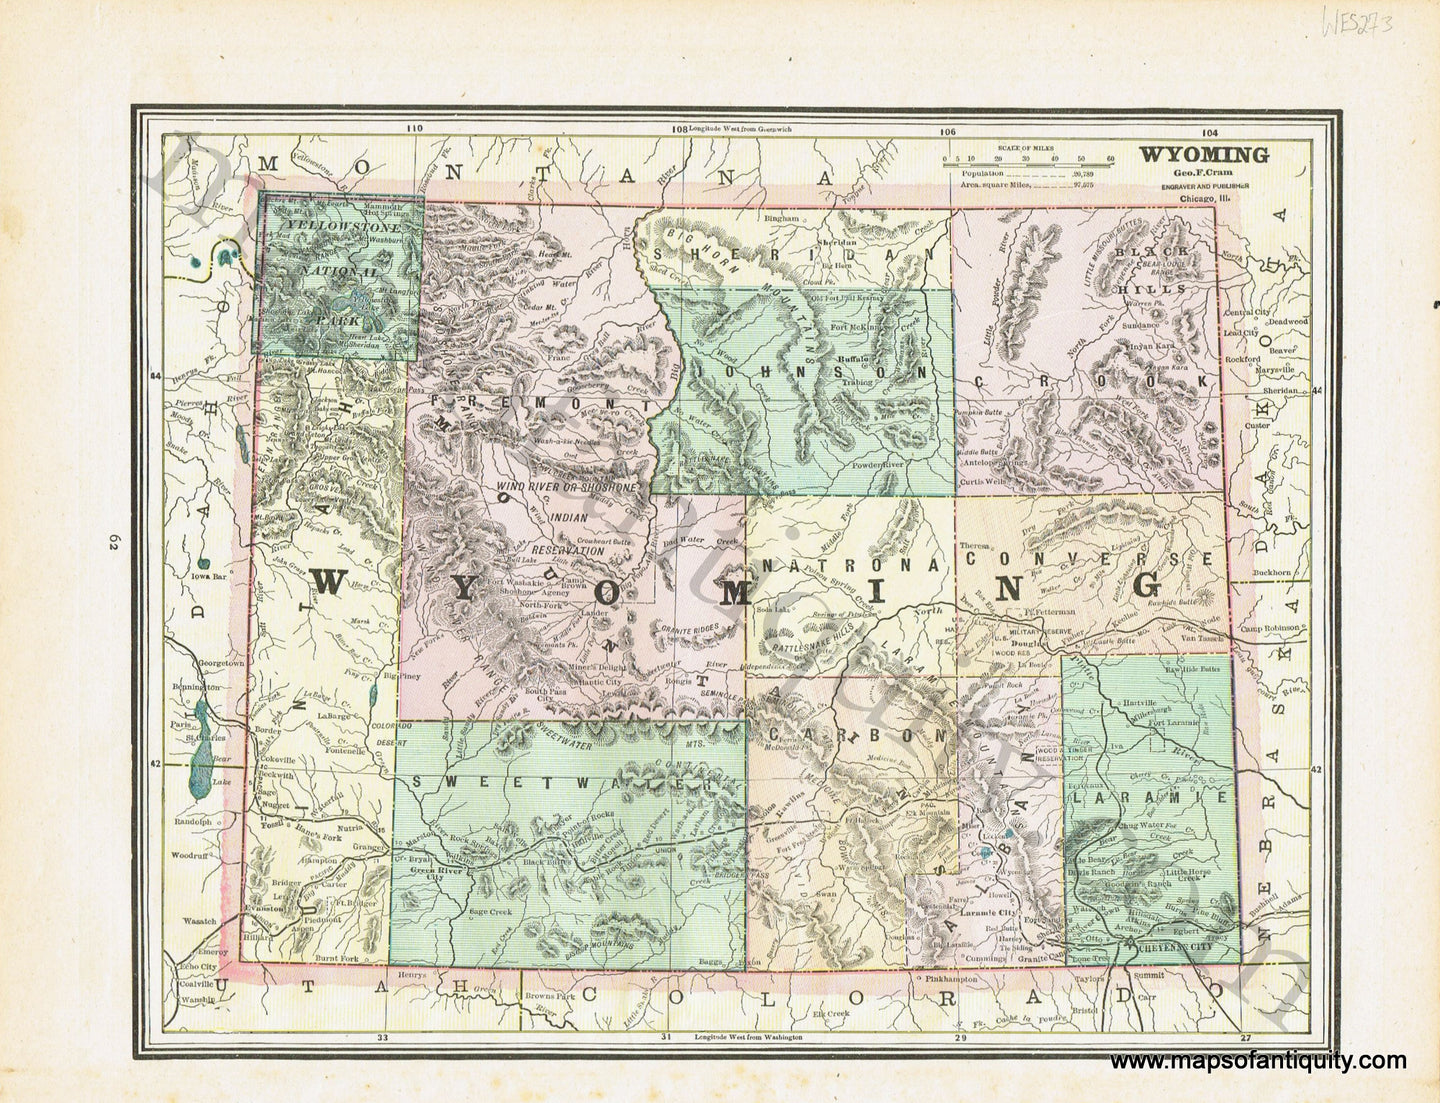 Antique-Printed-Color-Map-Wyoming-verso:-South-Dakota-United-States-West-Mid-West-c.-1885-Cram-Maps-Of-Antiquity